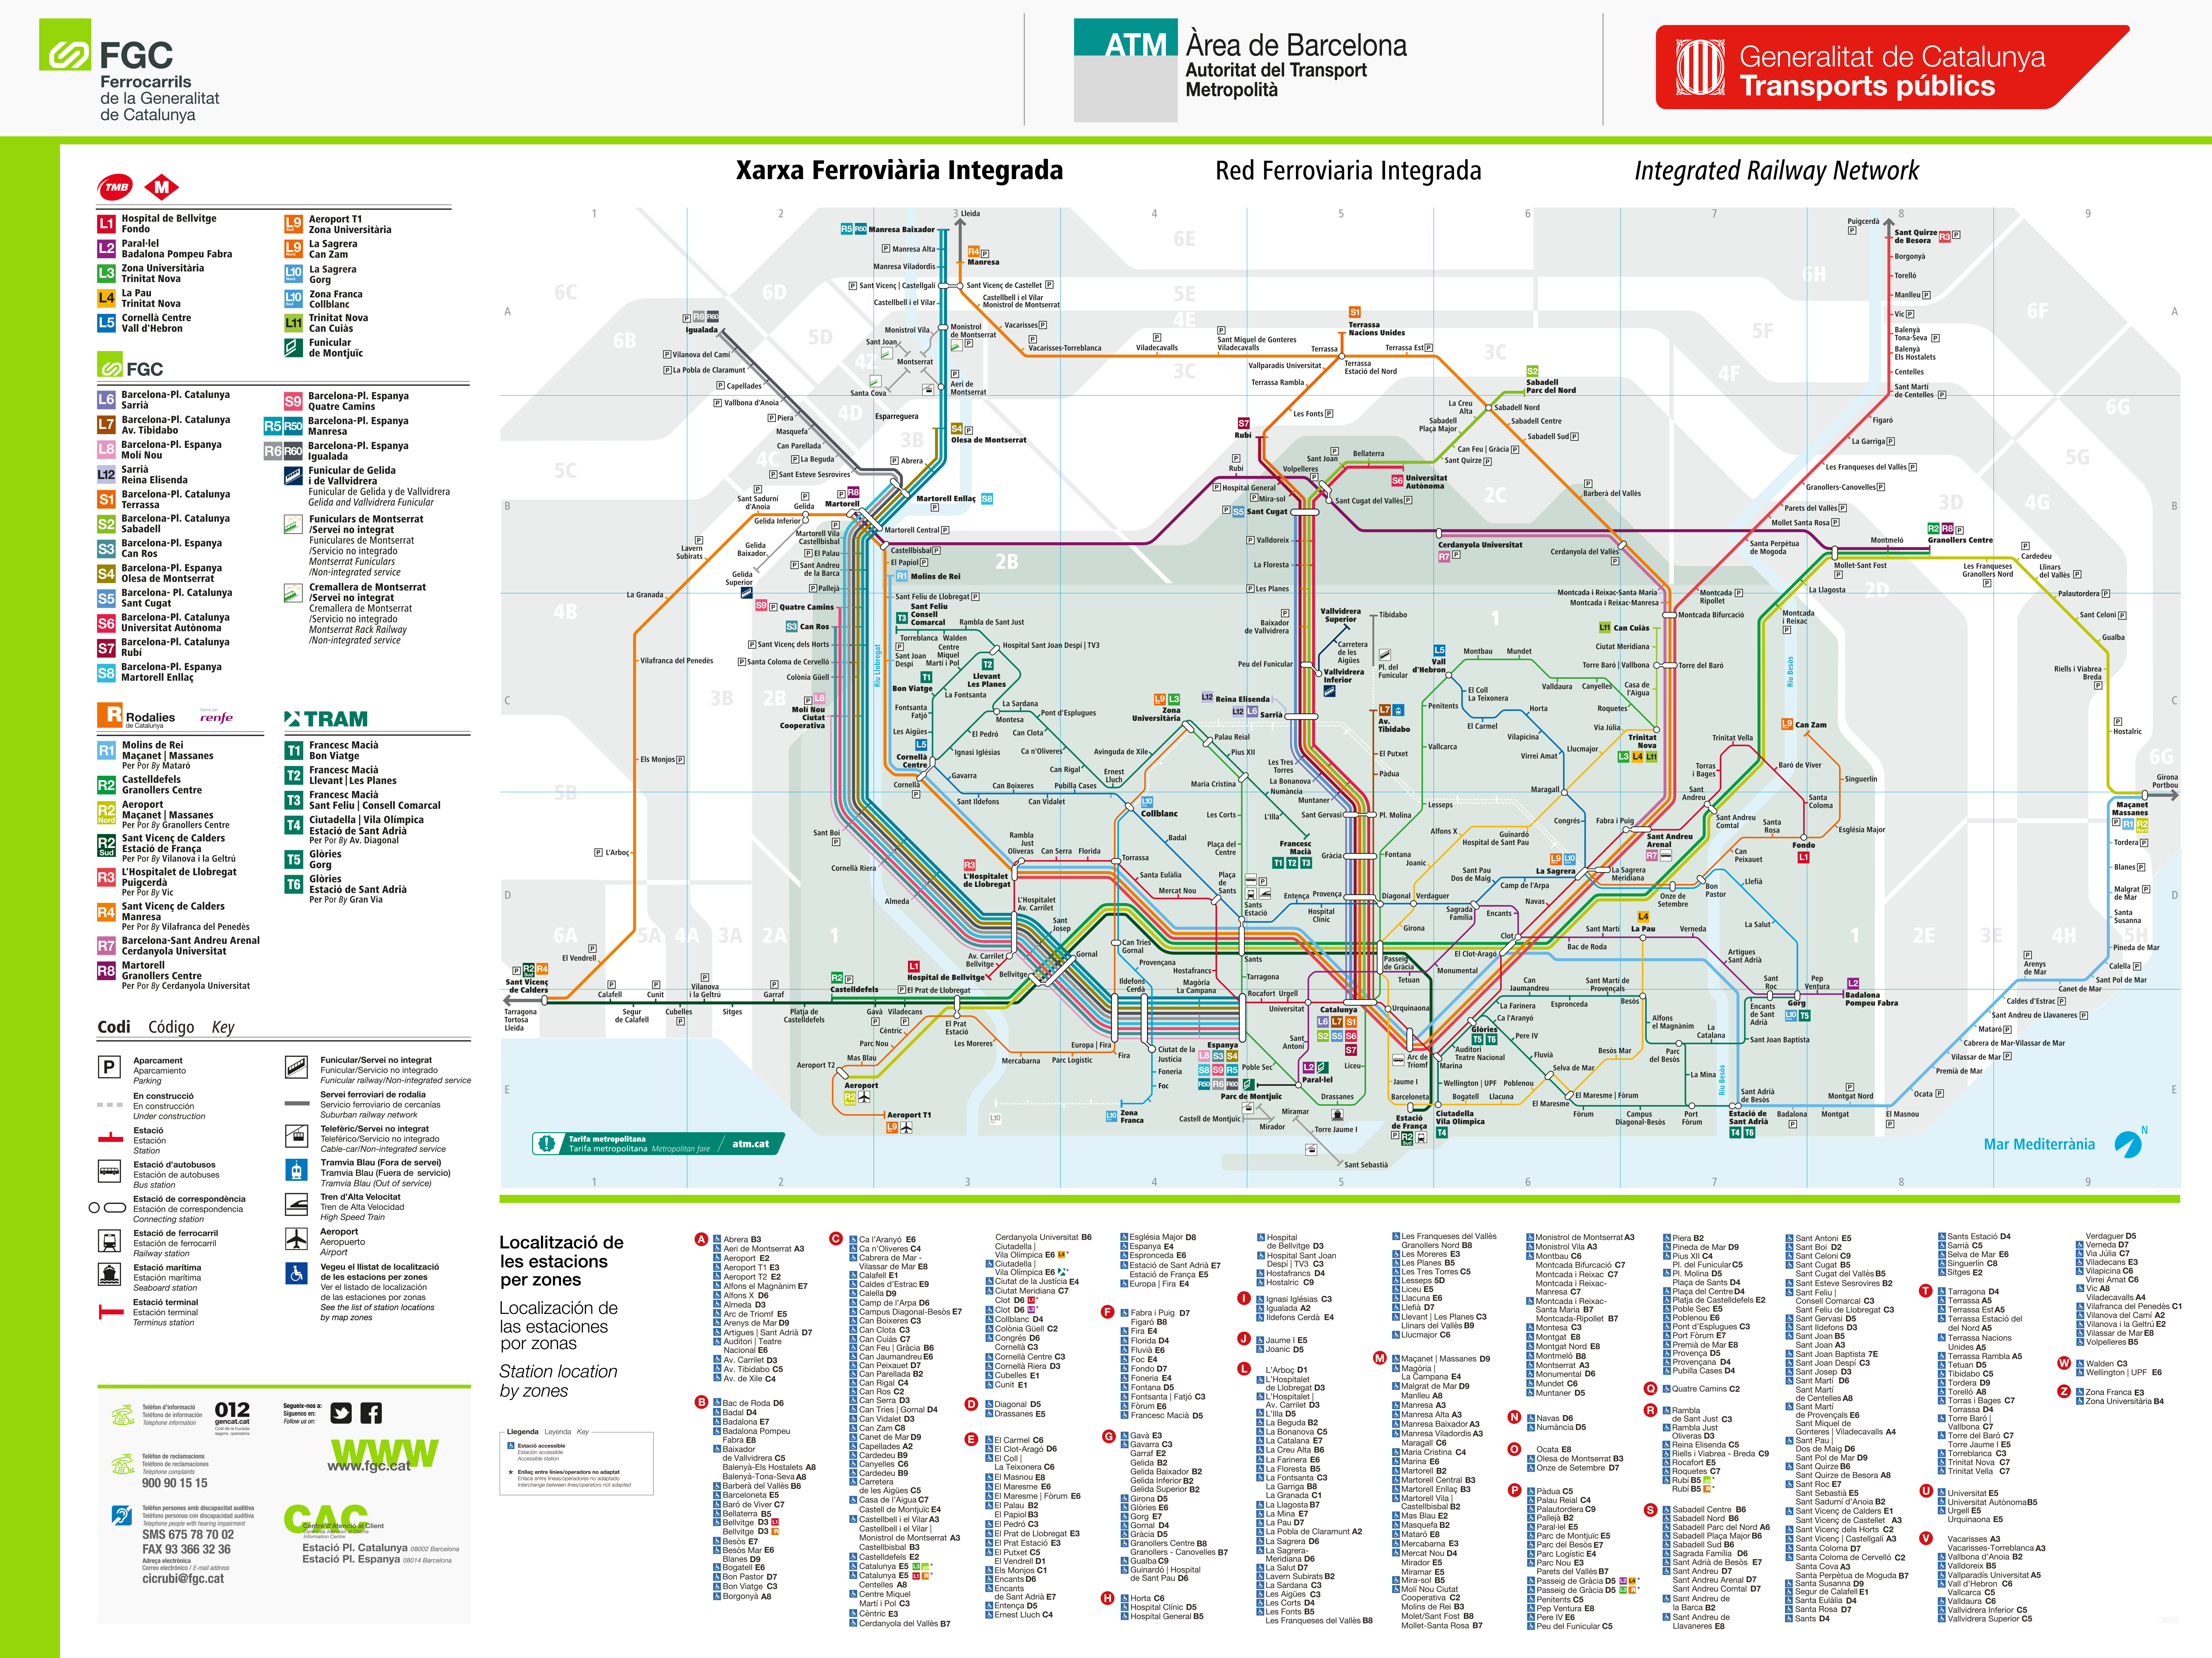 Train schedules, lines and network map - FGC